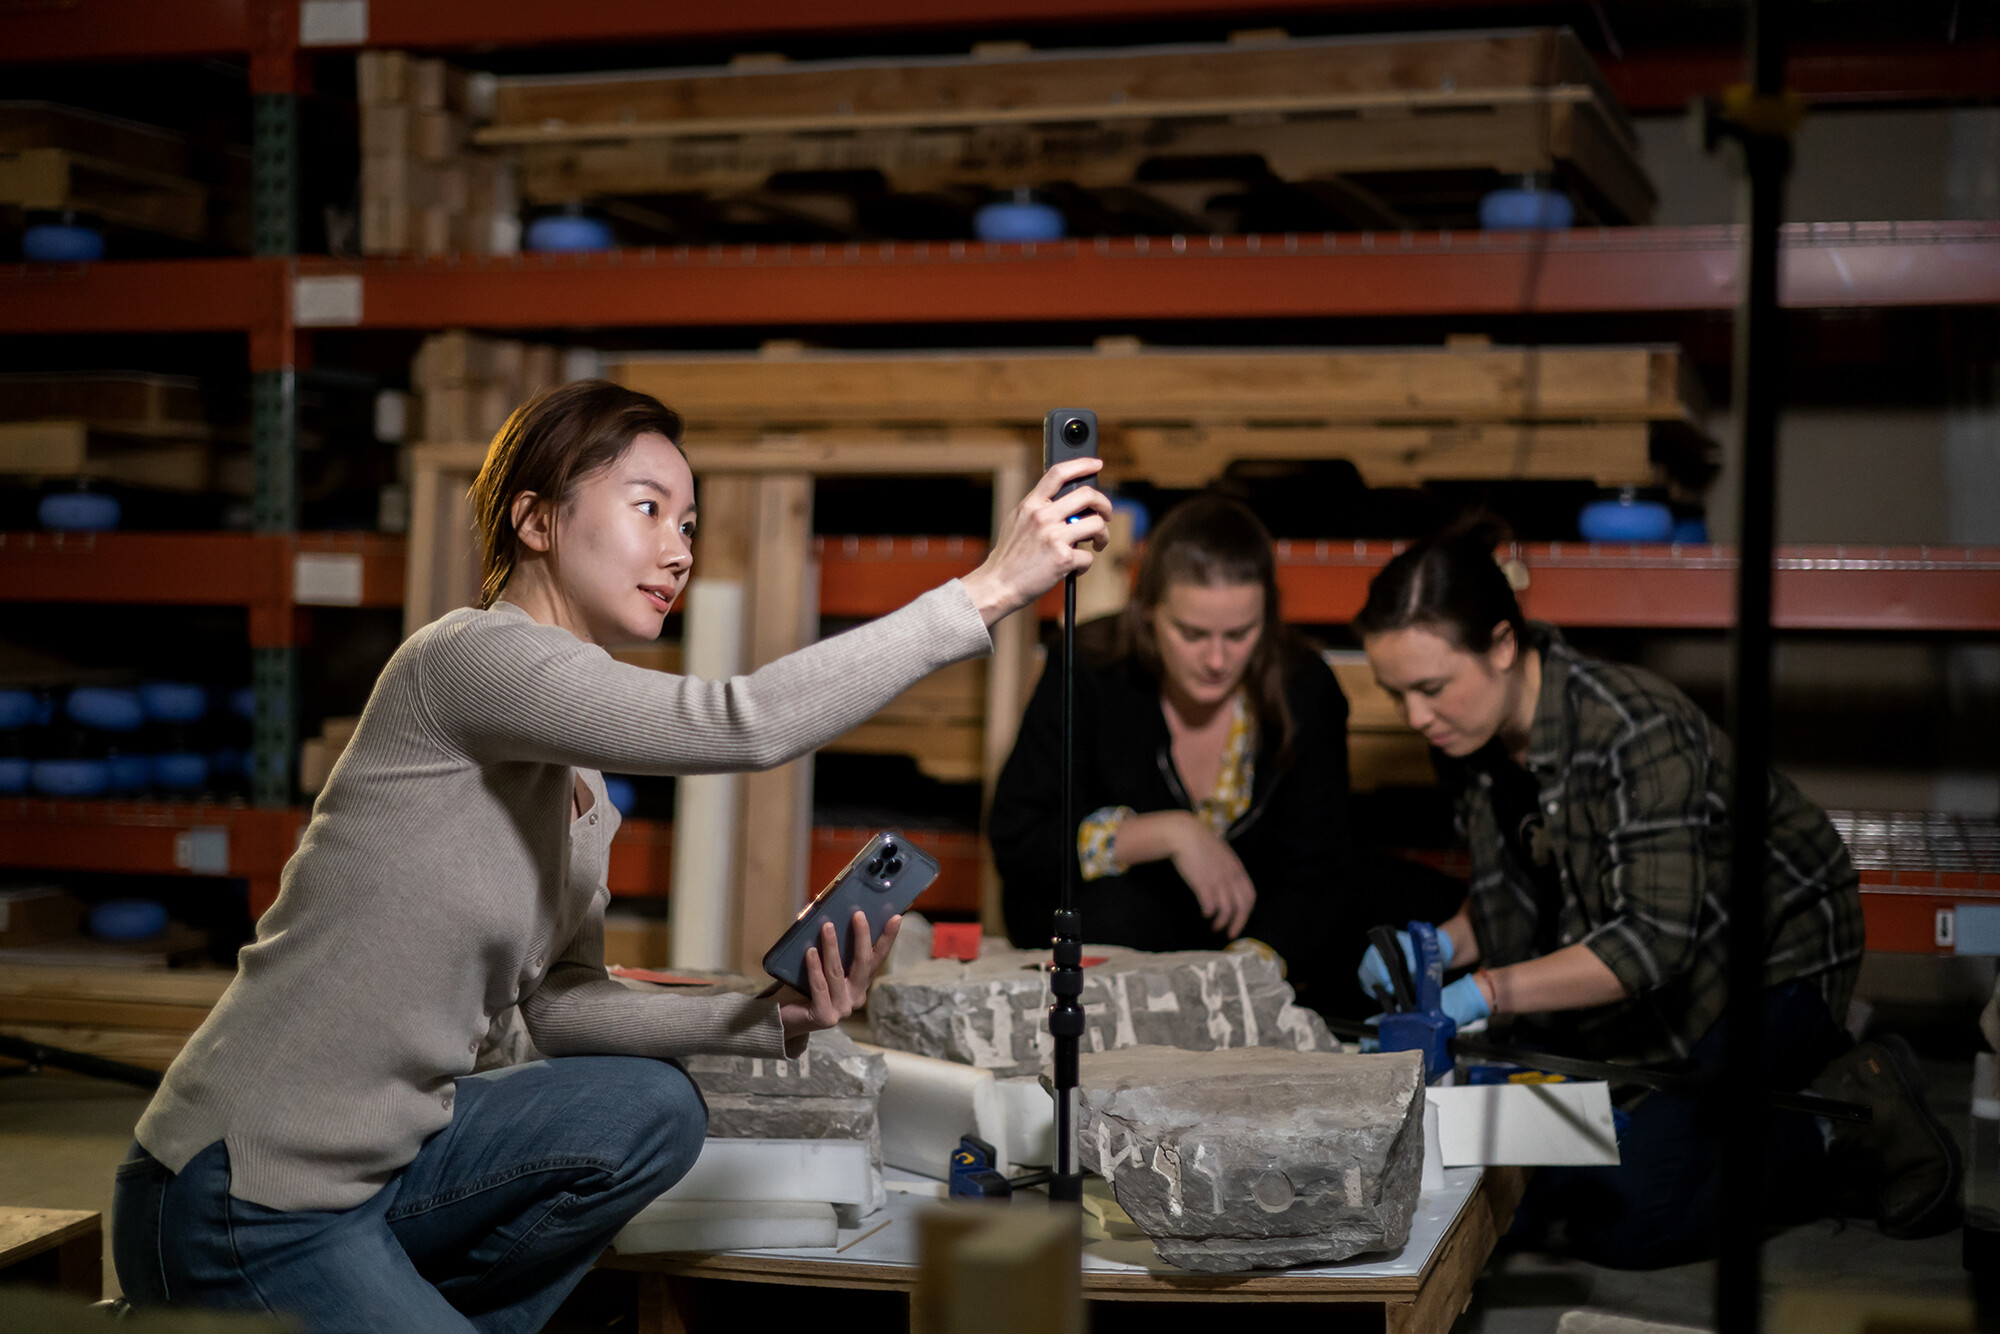 A student checks a light meter while two other students work on the ground of the Museum warehouse.